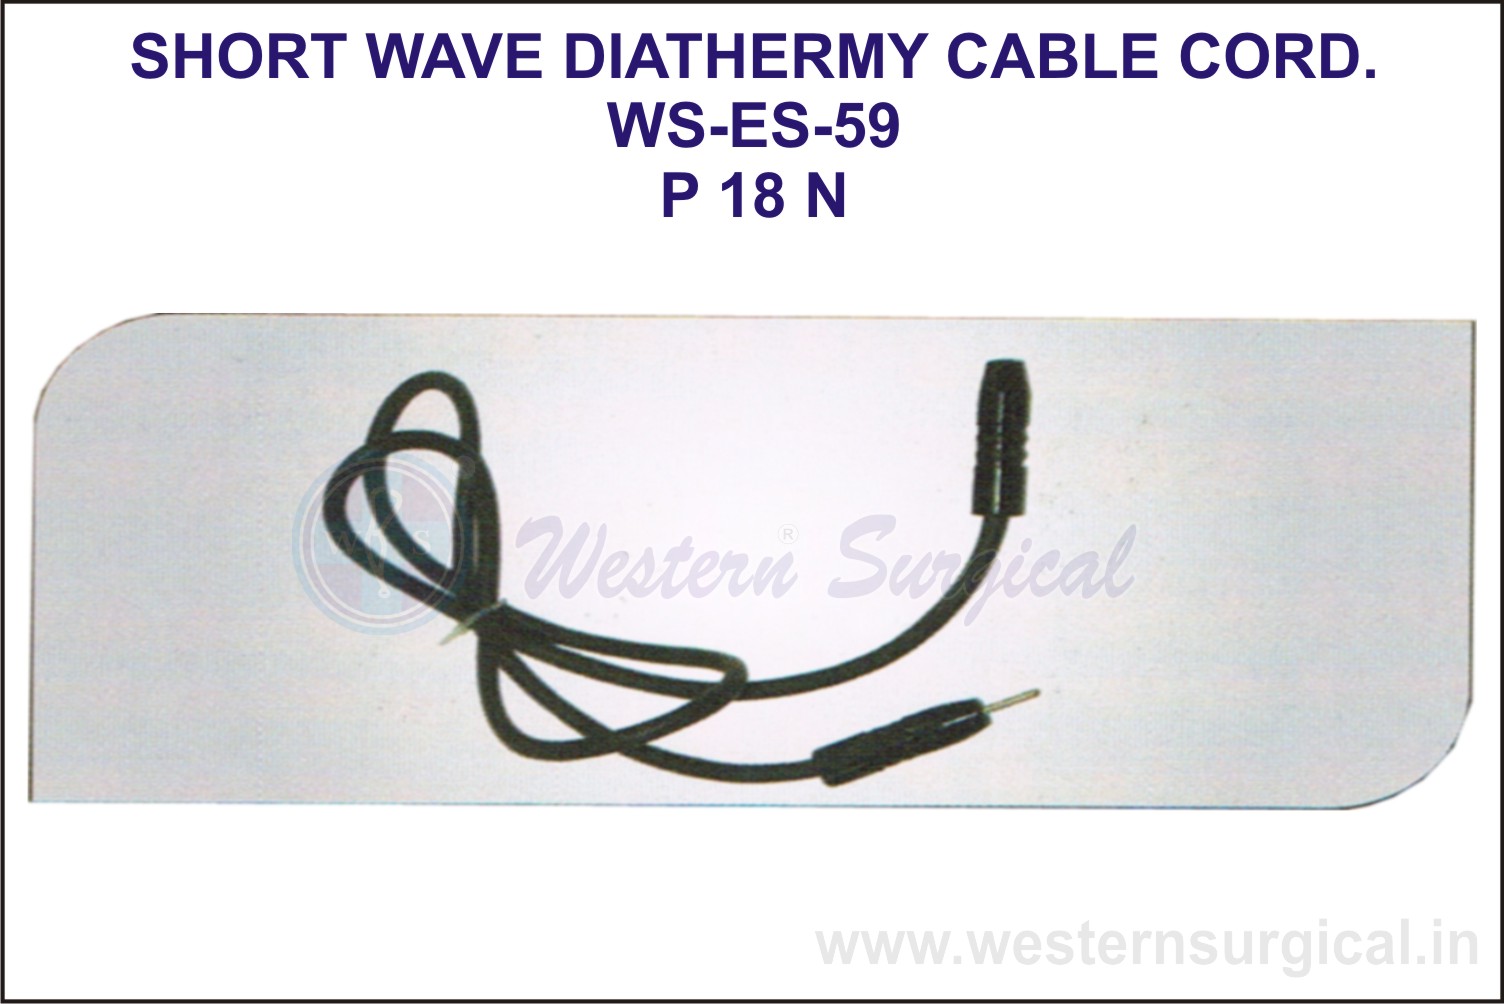 Short Wave Diathermy Cable Cord